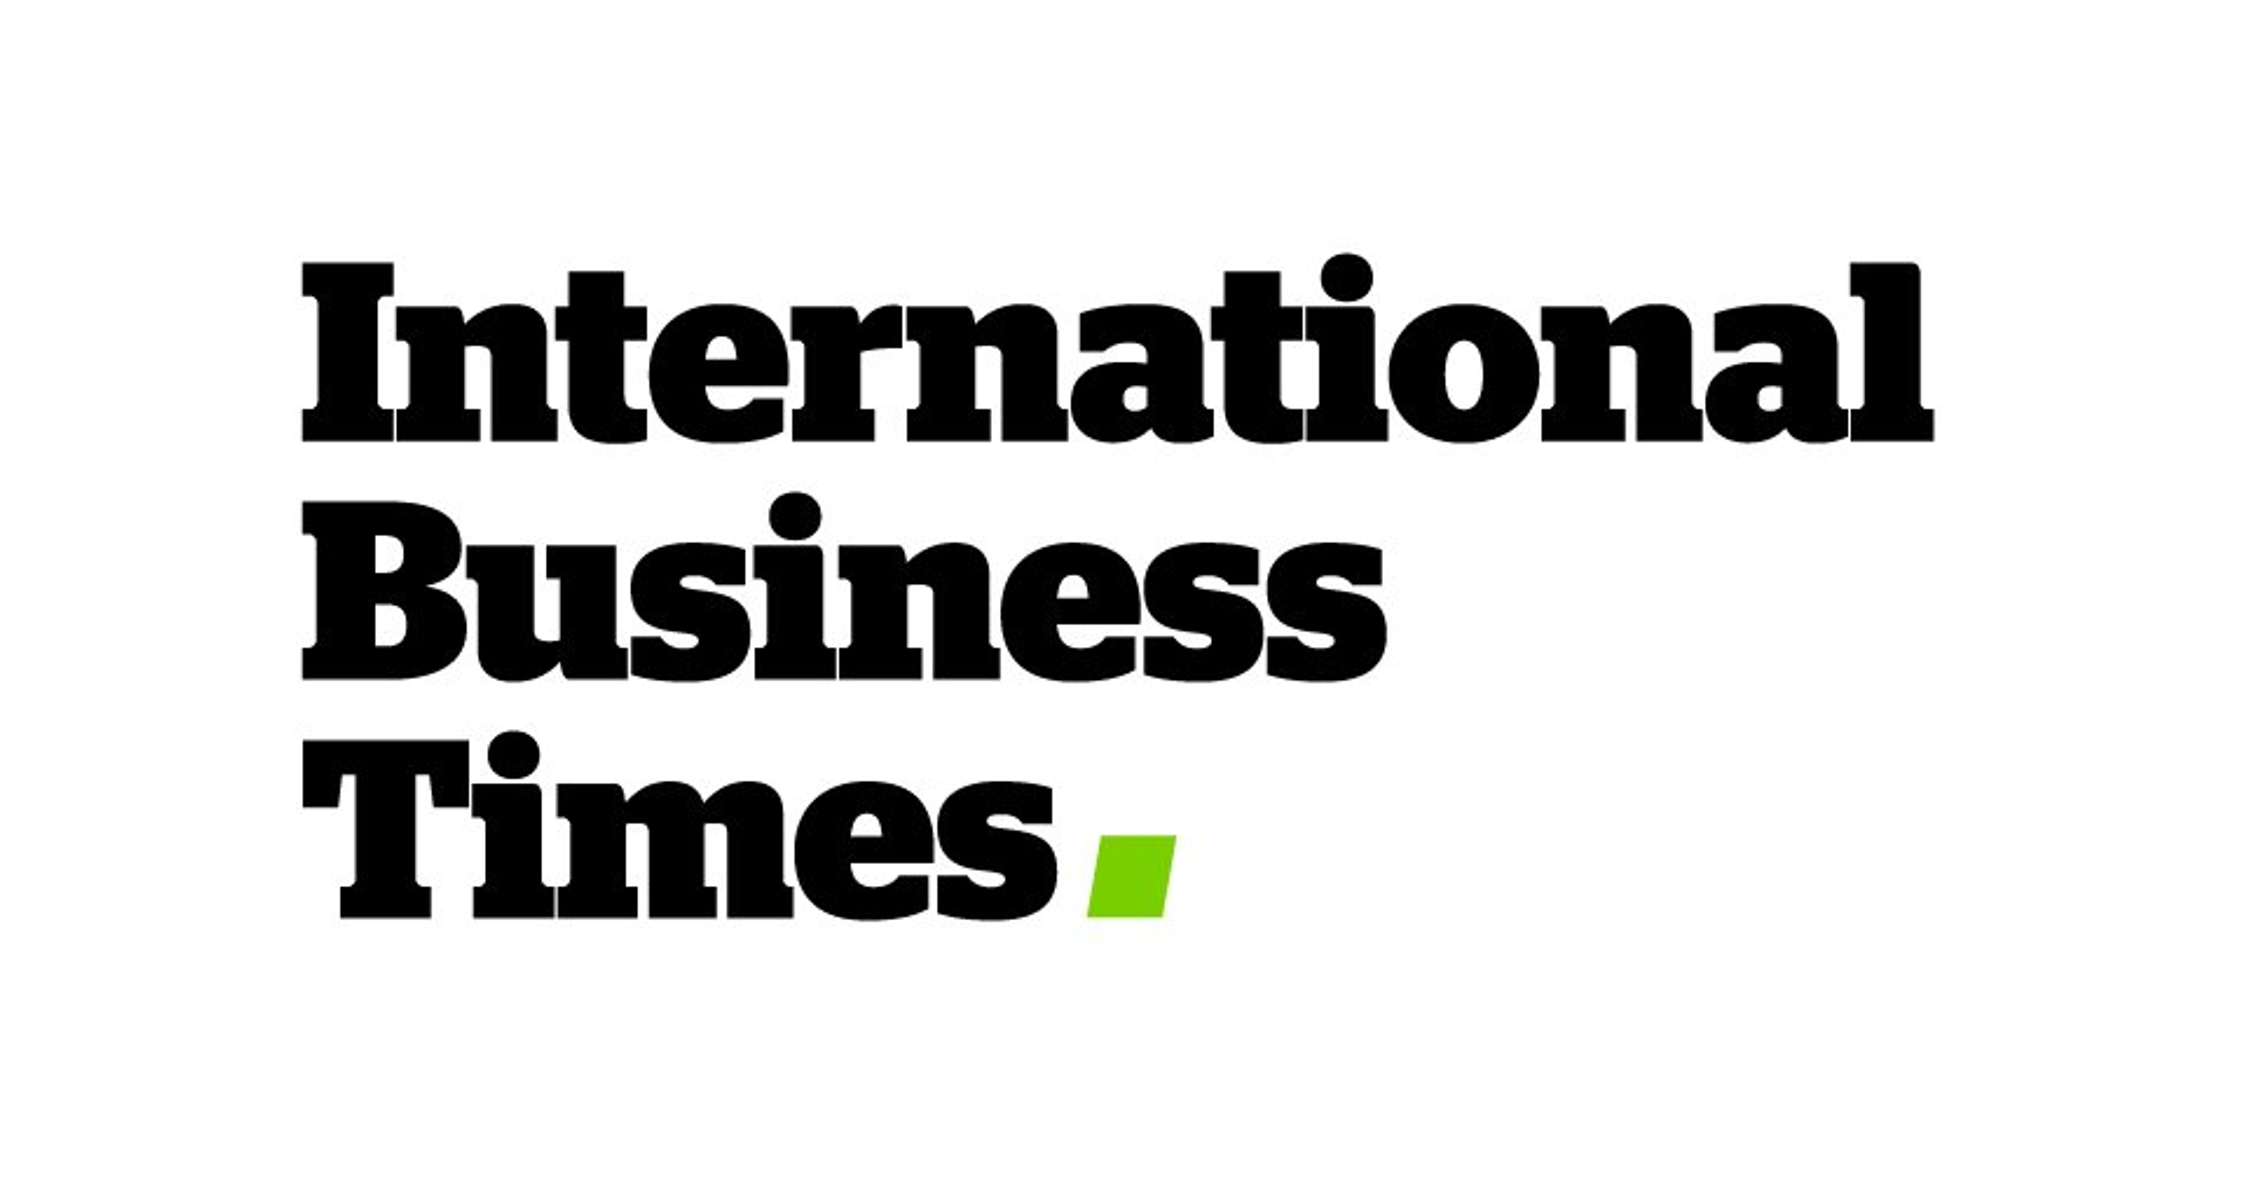 Stops was featured in the International Business Times